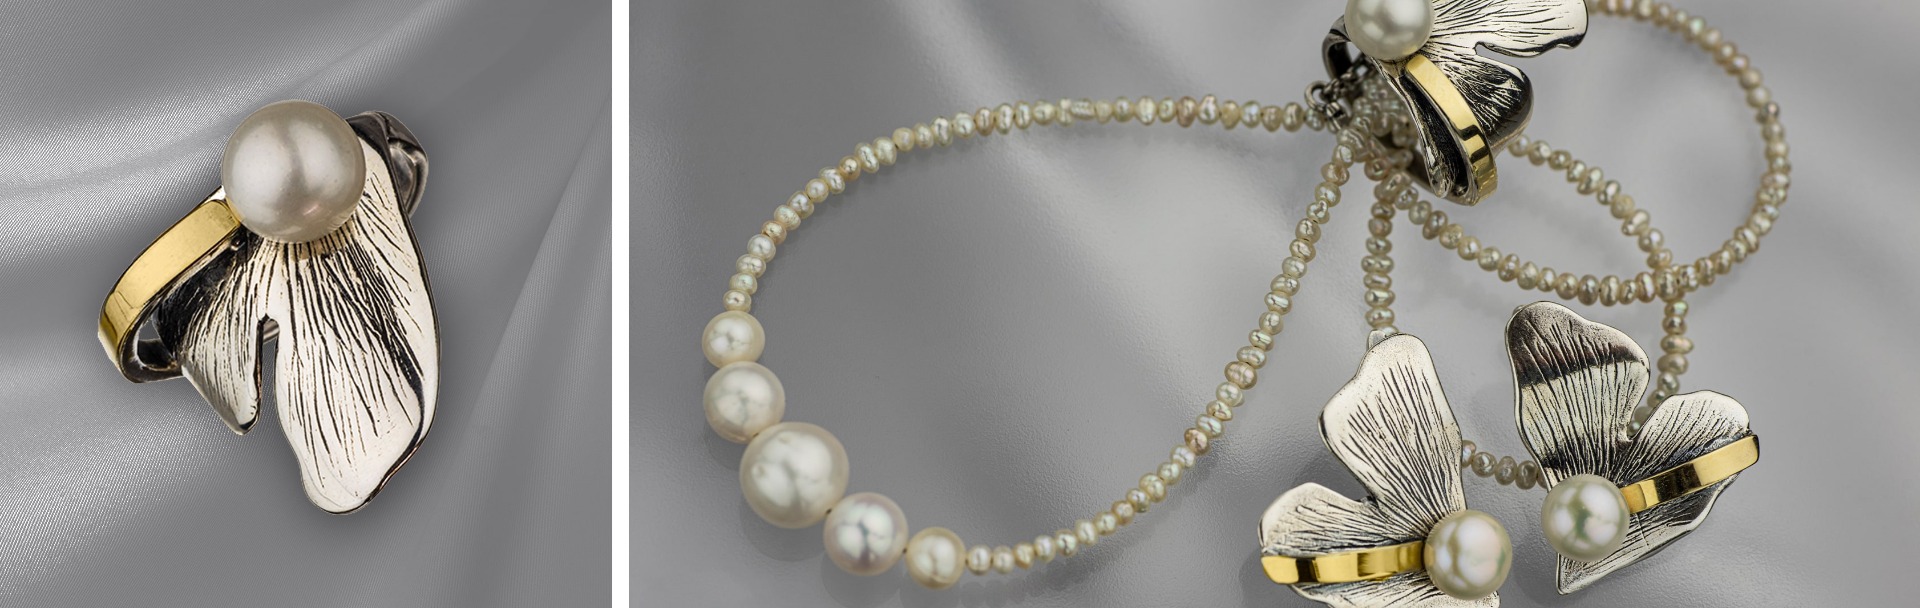 925 Sterling Silver & 9K Gold Jewelry with Pearls